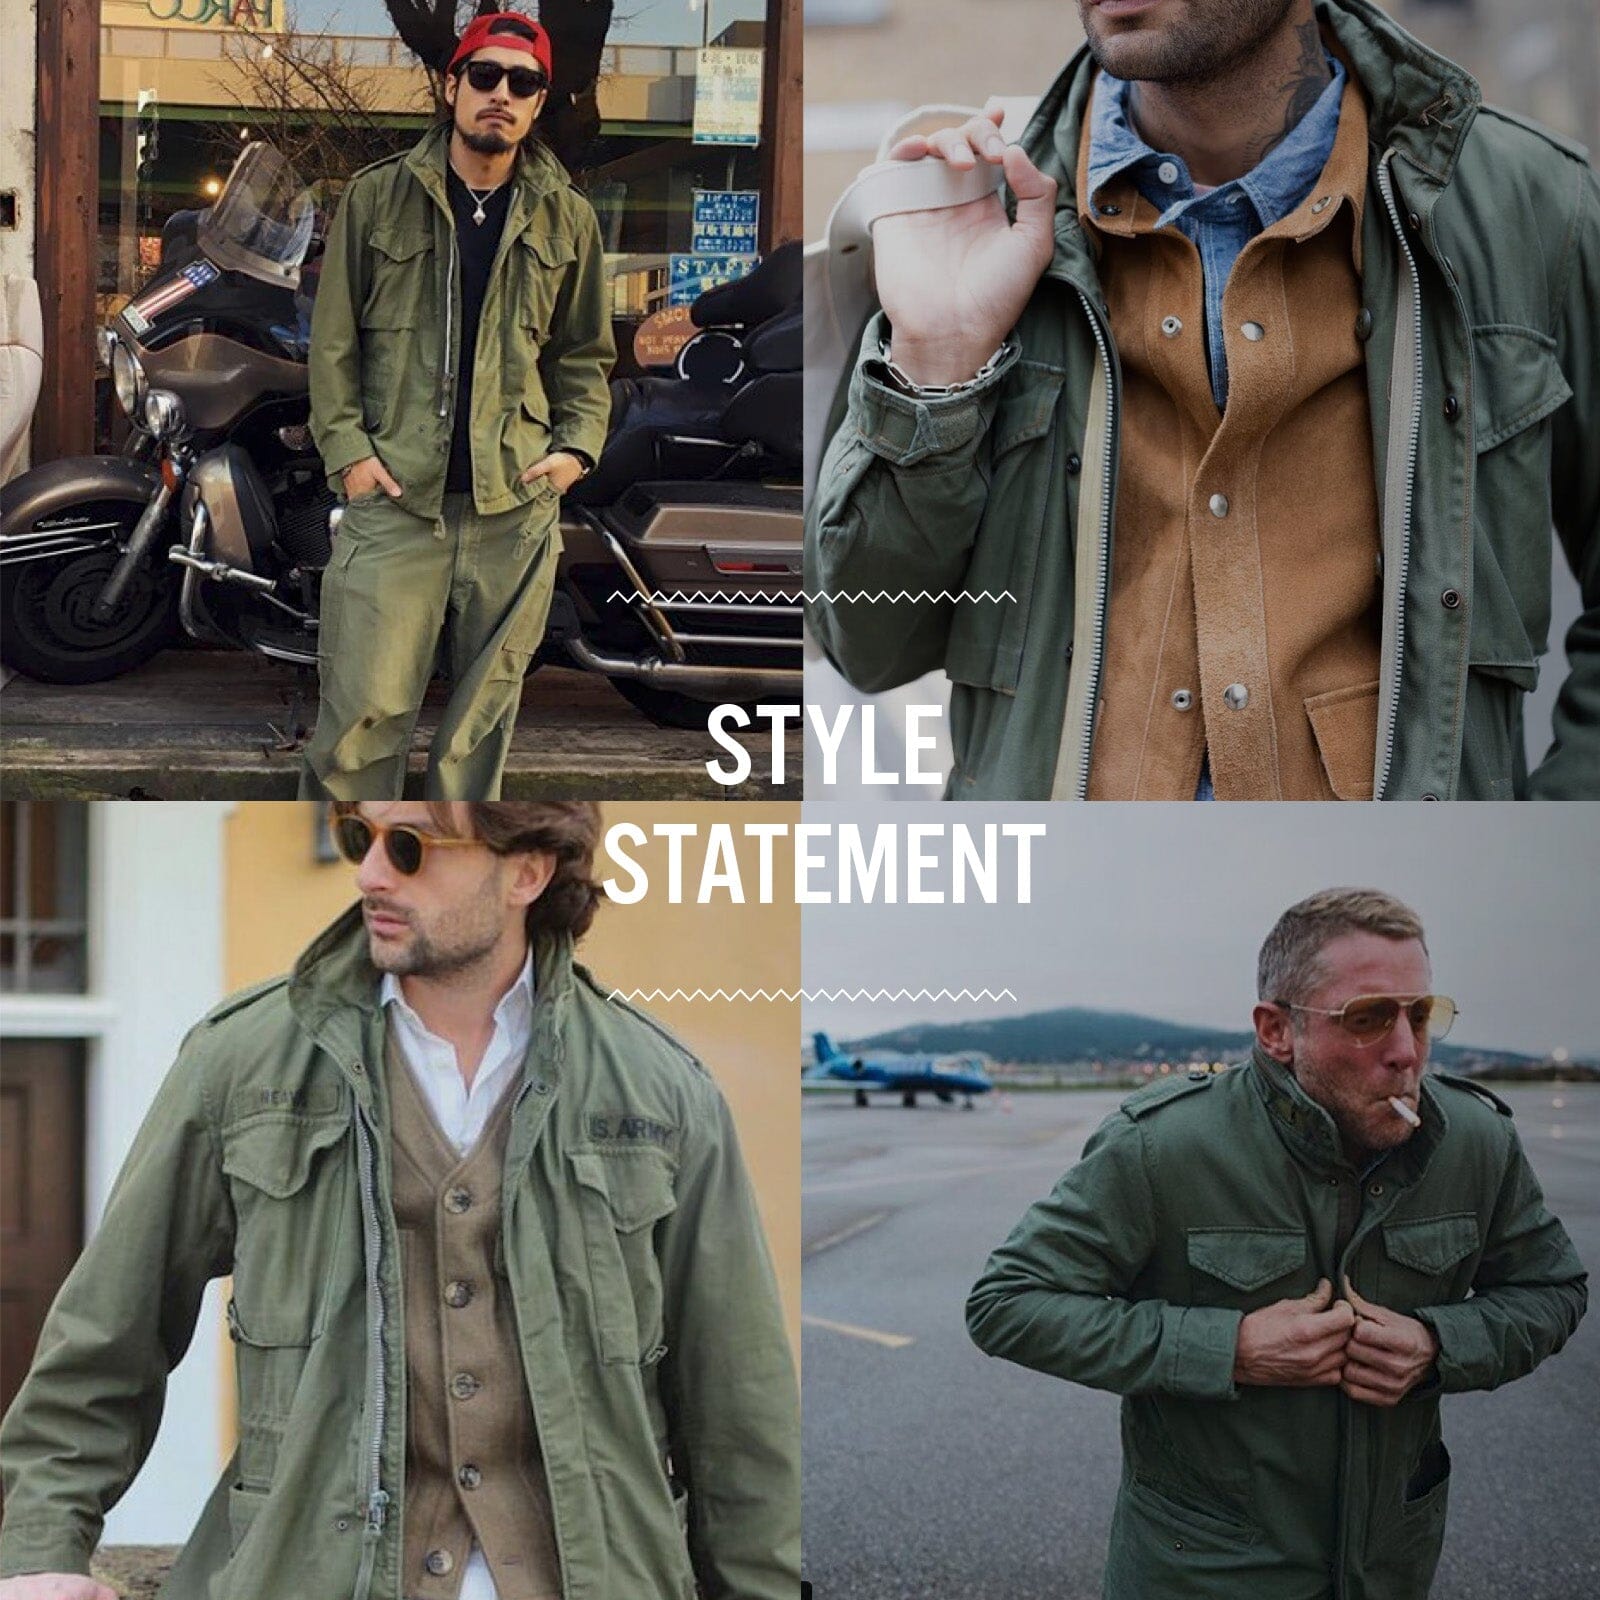 The M-65 Field truly style Jacket - A universal statement